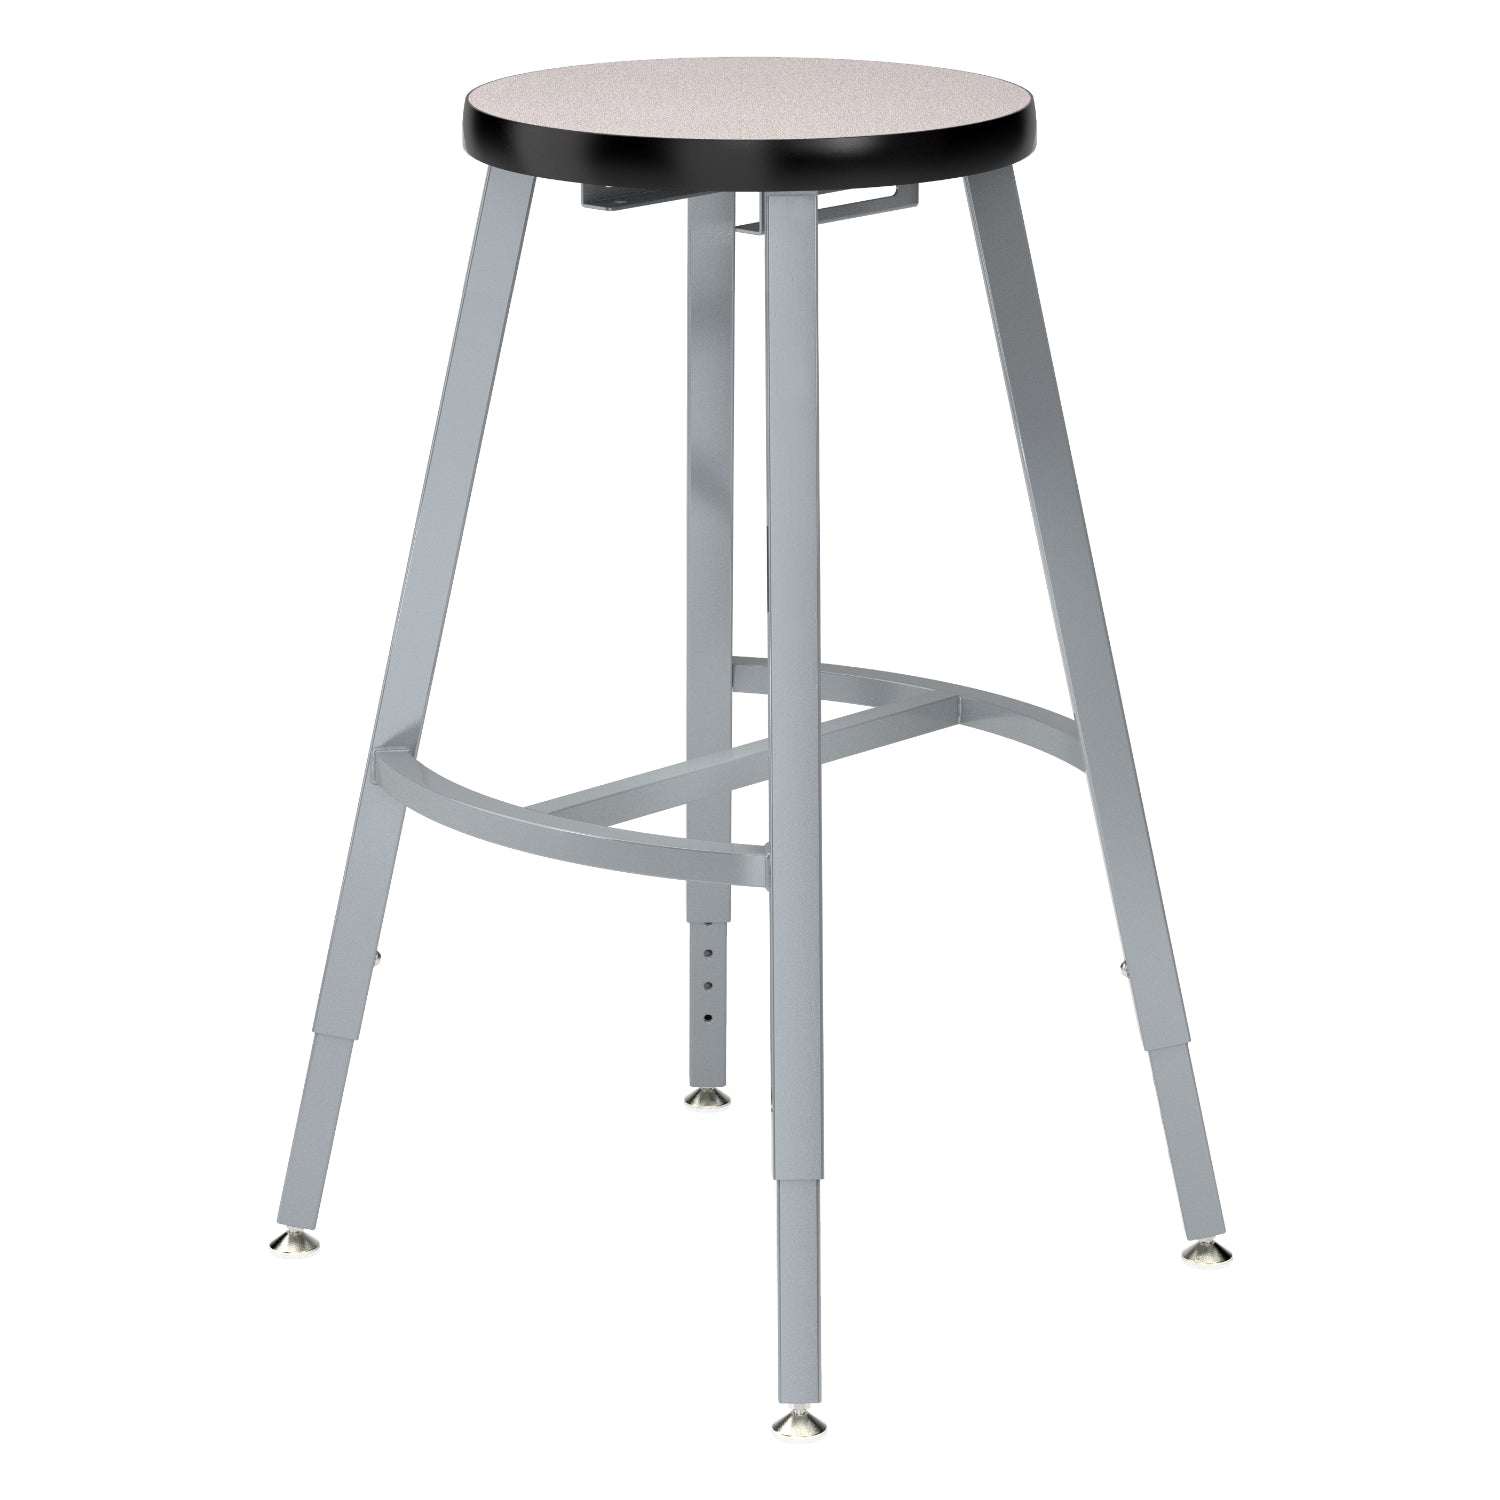 Titan Adjustable Height Stool, Laminate Seat with Particleboard Core/T-Mold Edge, 24-32" Seat Height